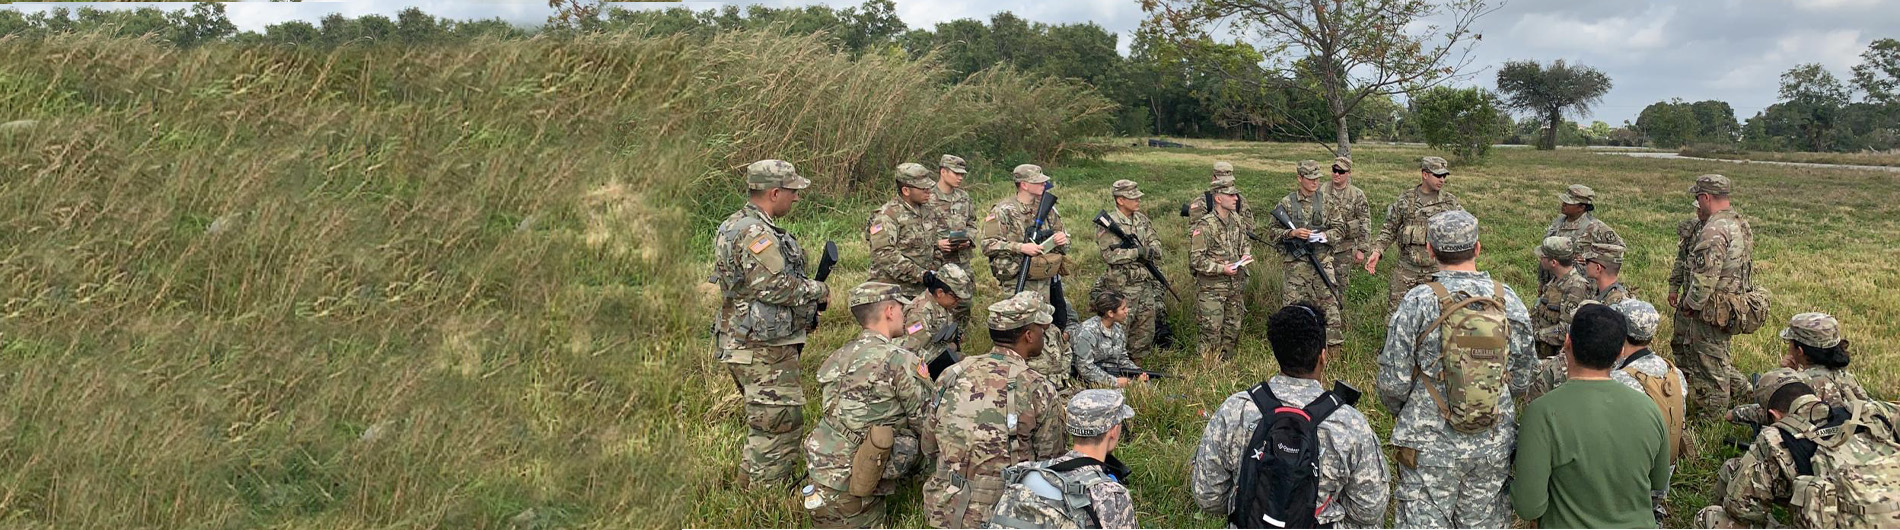 army rotc students training in the field